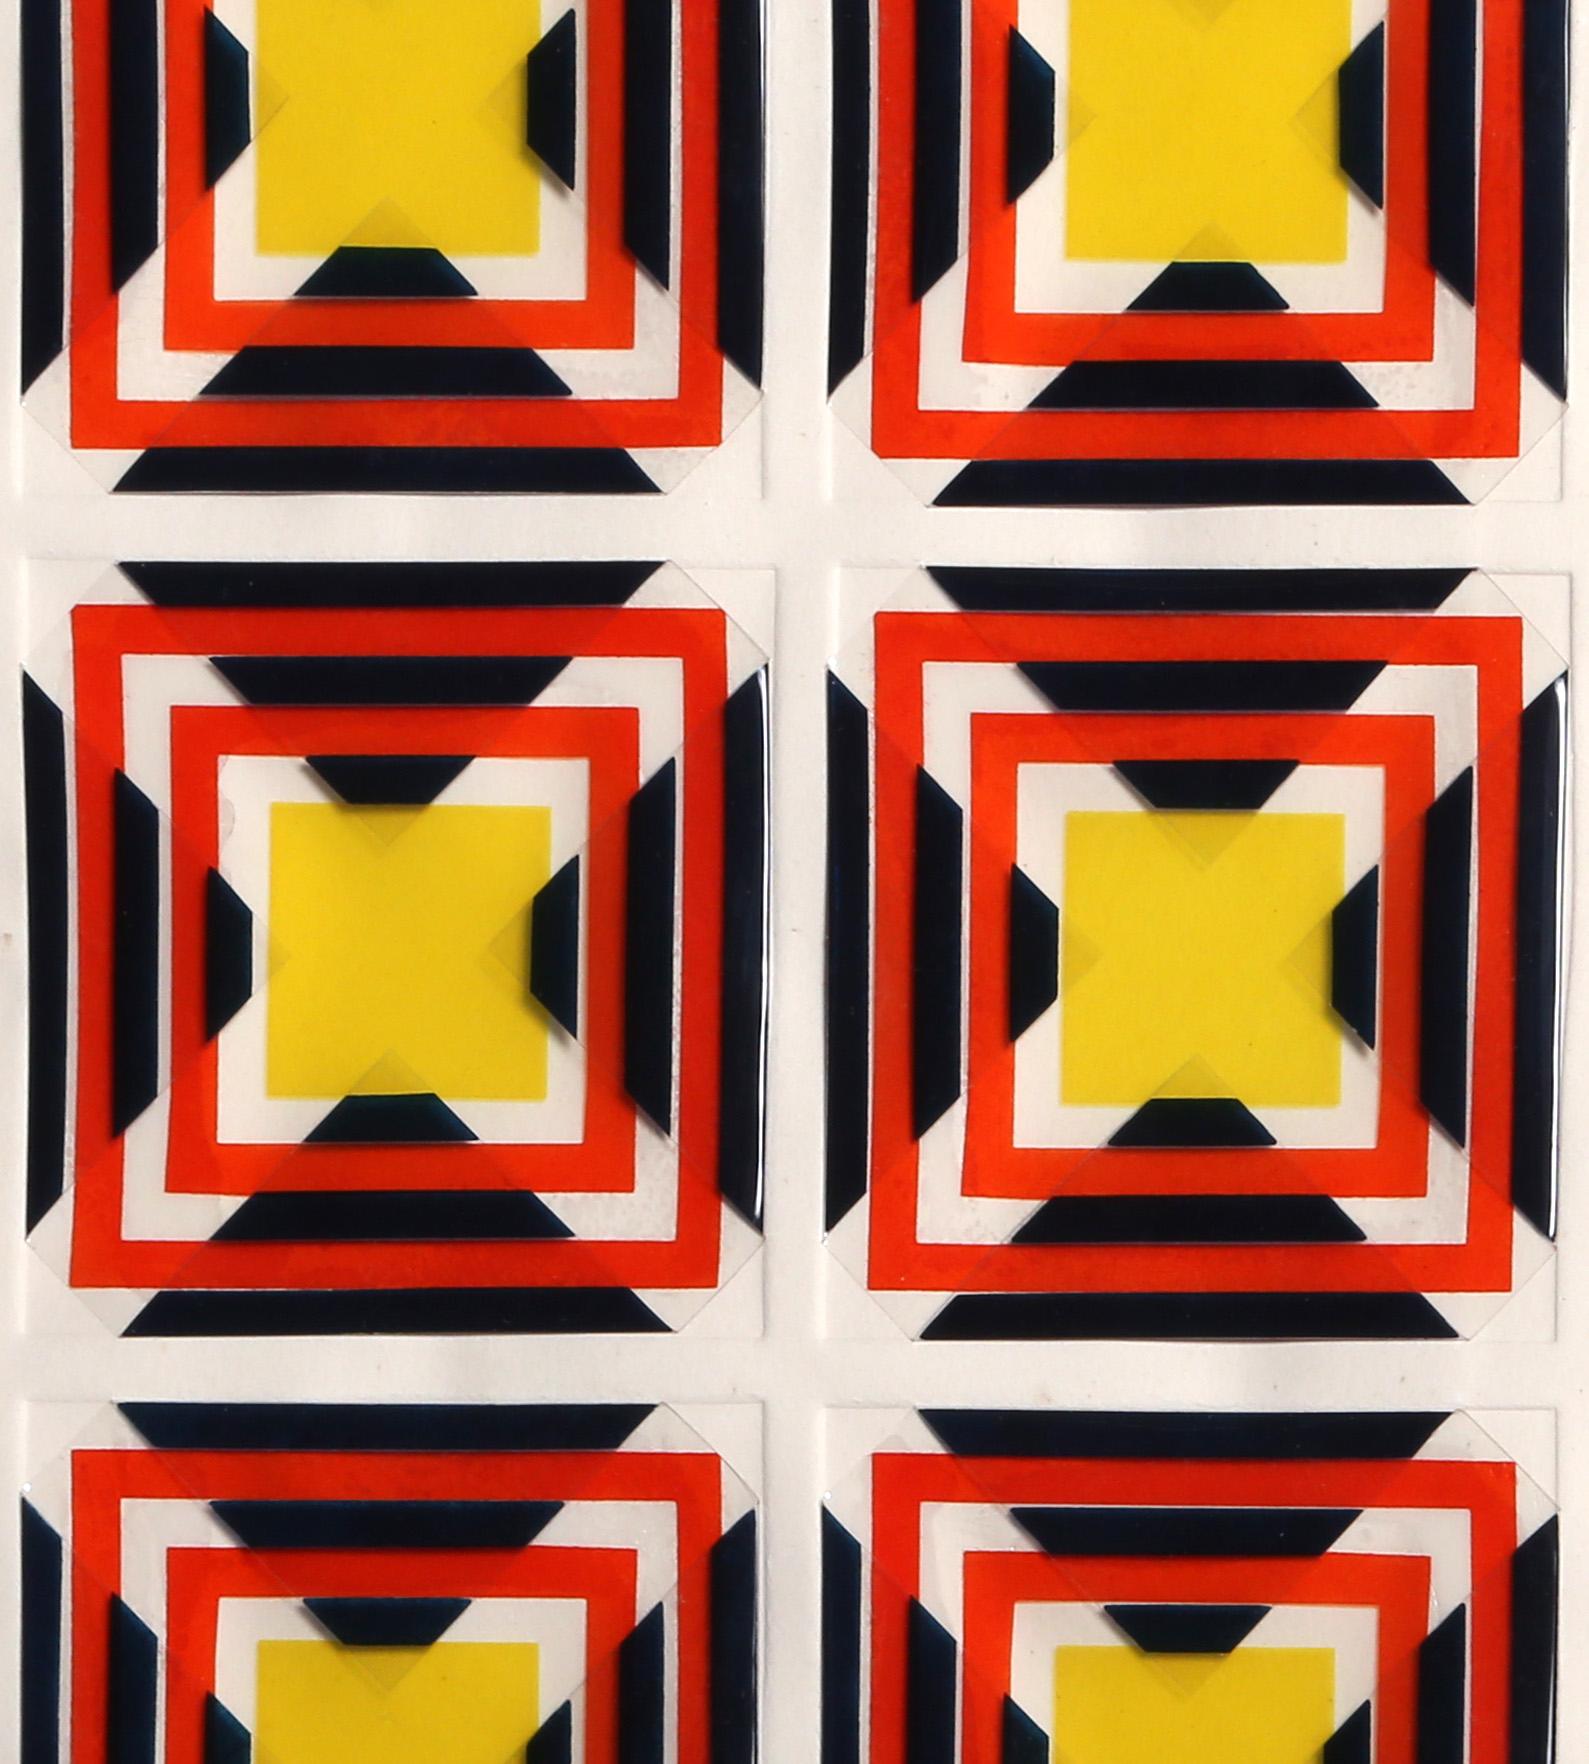 Artist: Anne Youkeles, Austrian (1920 - )
Title: Kaleidoscope
Year: 1969
Medium: 3-D Silkscreen on plastic, signed, numbered, dated, and titled in pencil 
Size: 23 x 22 in. (58.42 x 55.88 cm)
Frame: 28 x 28 inches
